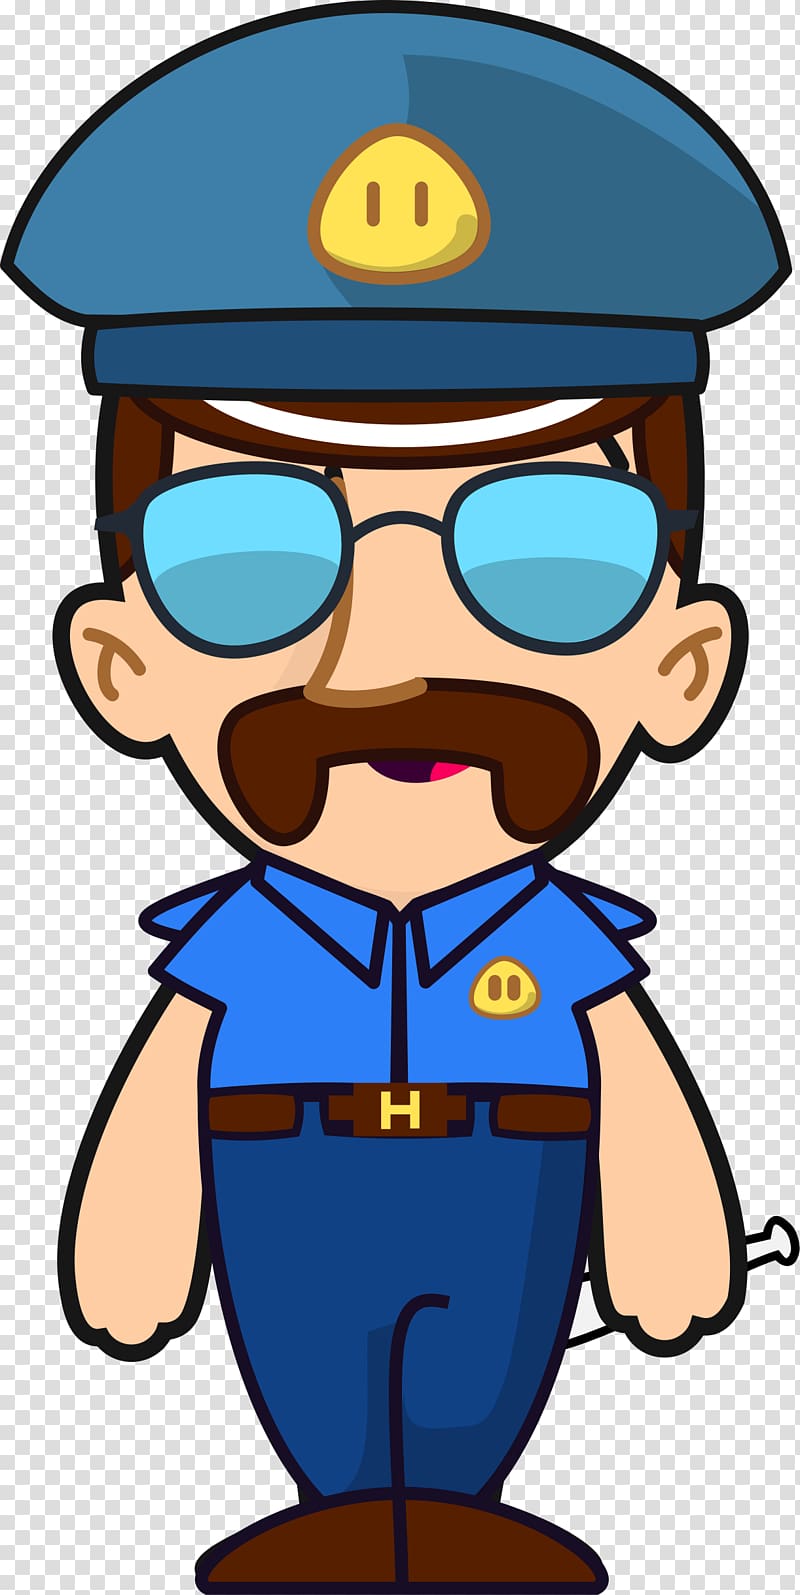 Cartoon Police officer Drawing Police station, Cartoon police transparent background PNG clipart